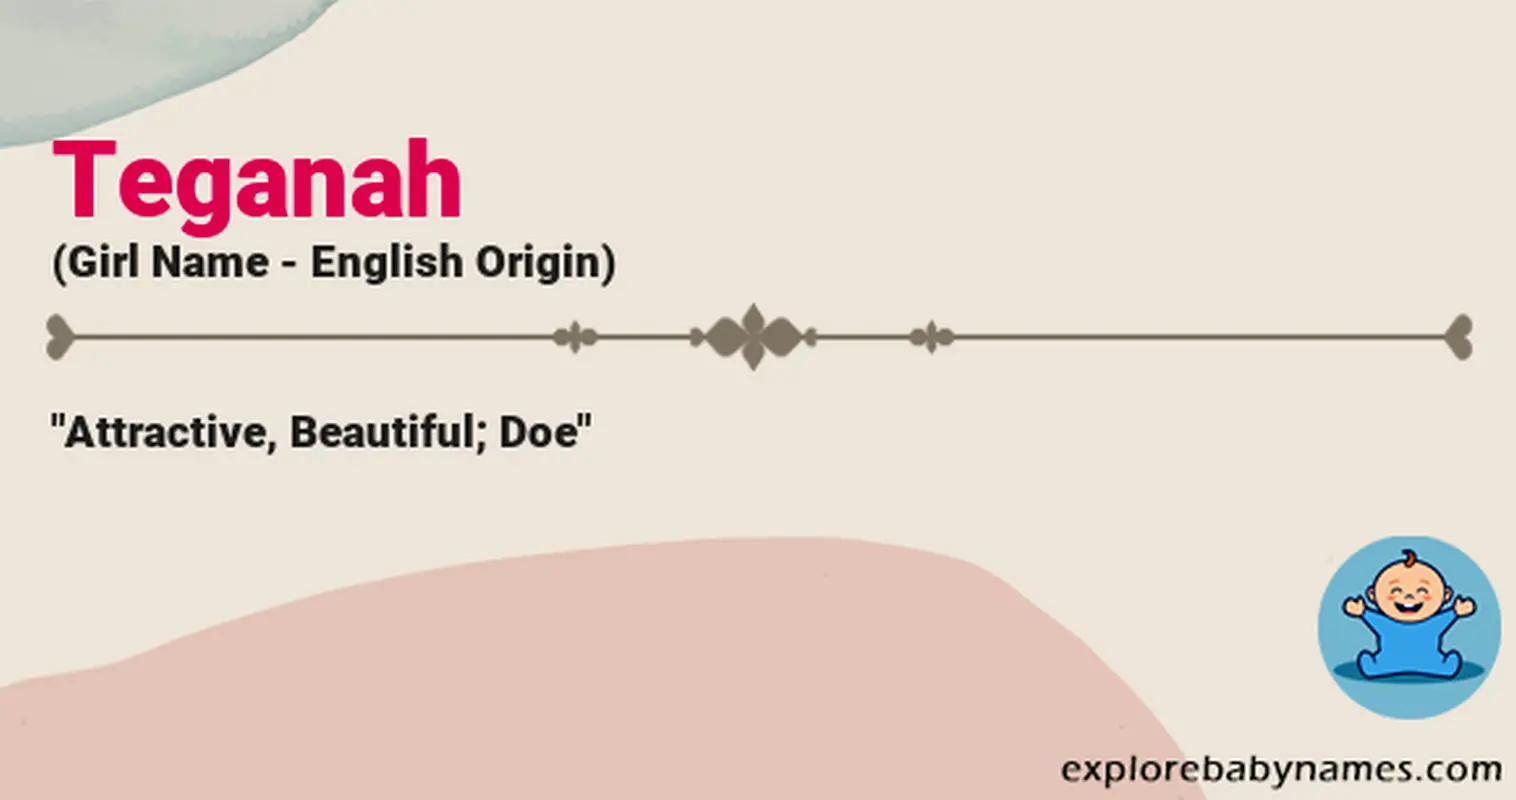 Meaning of Teganah